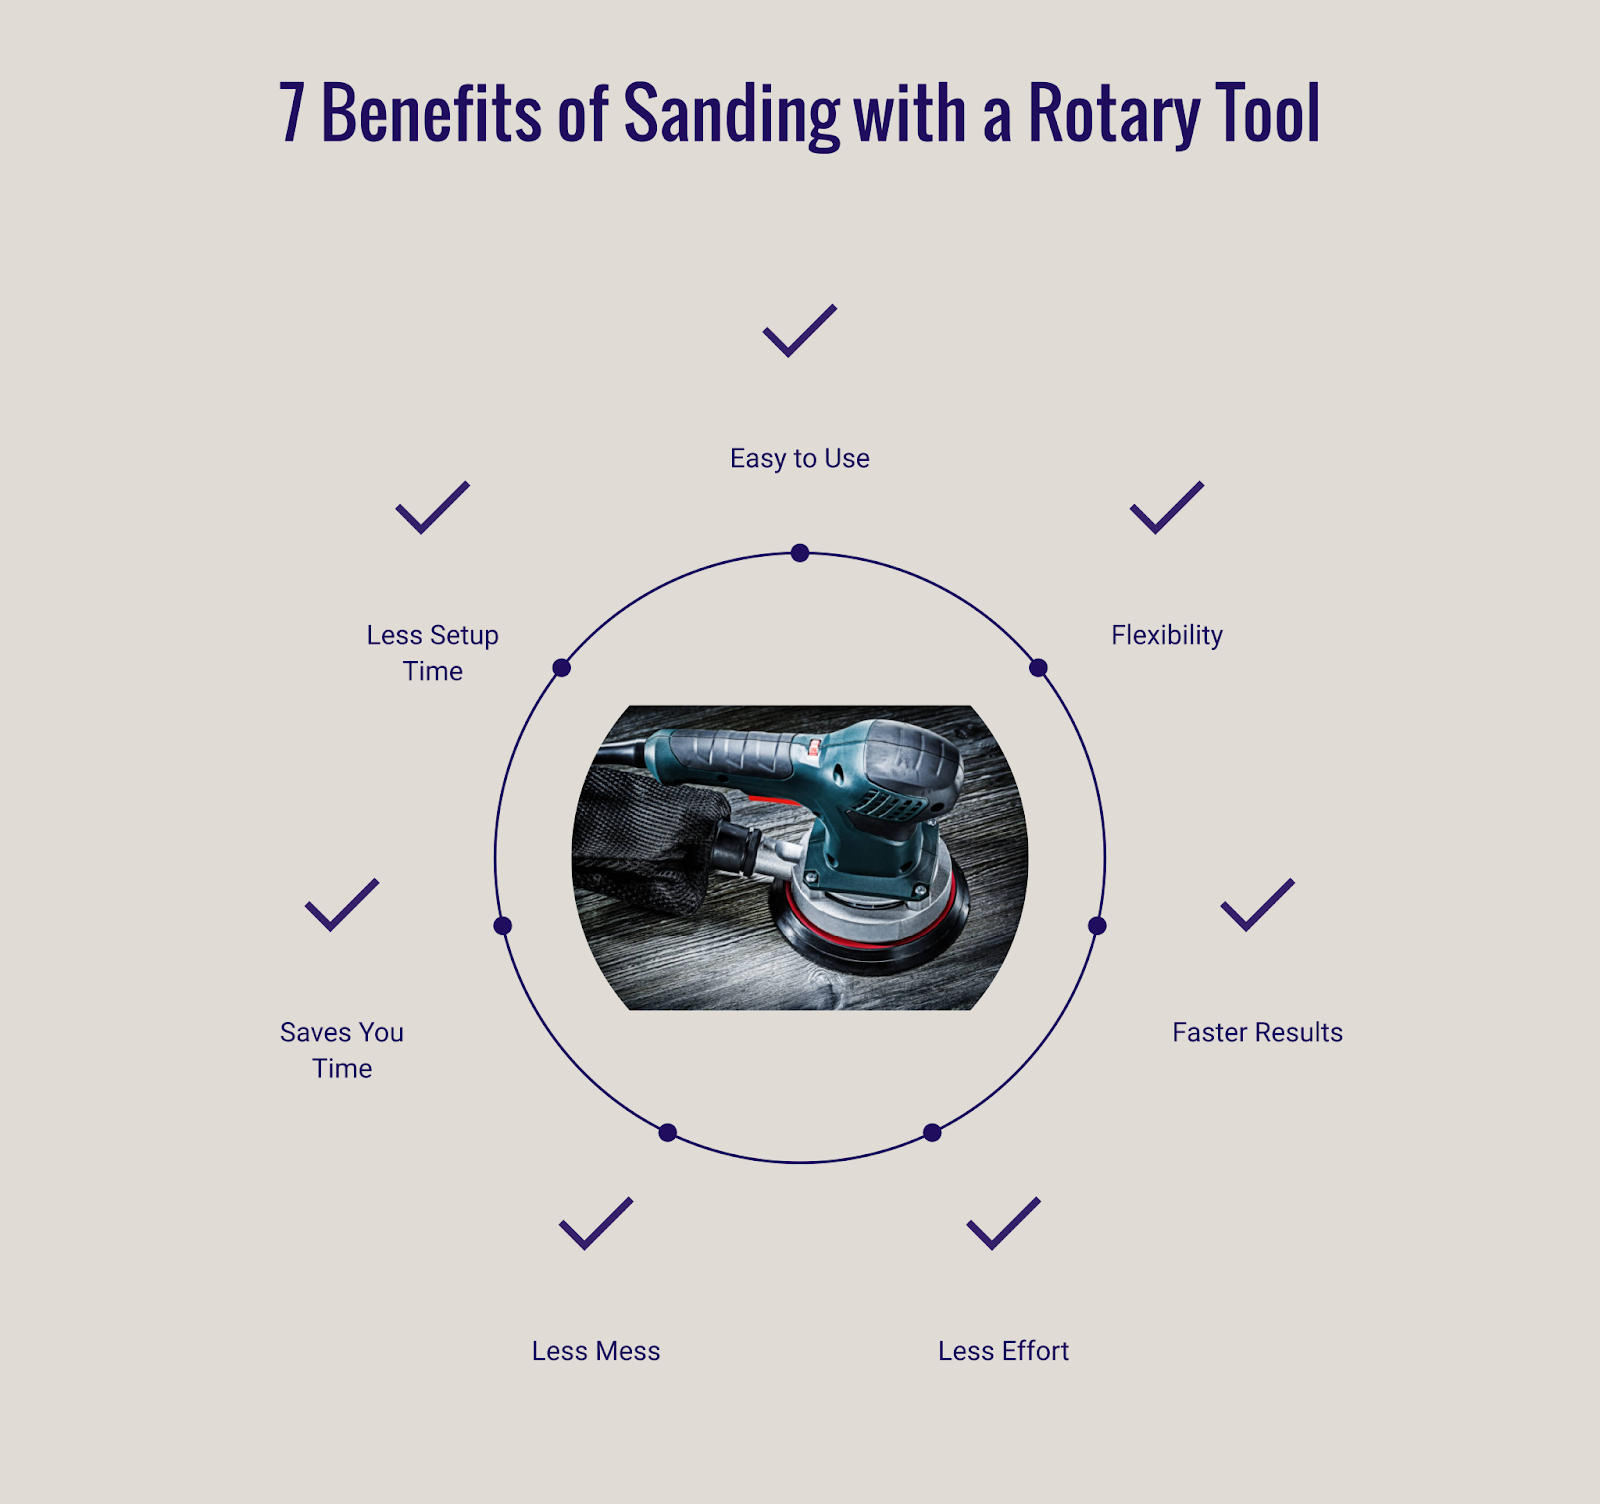 Top Benefits of Sanding with a Rotary Tool